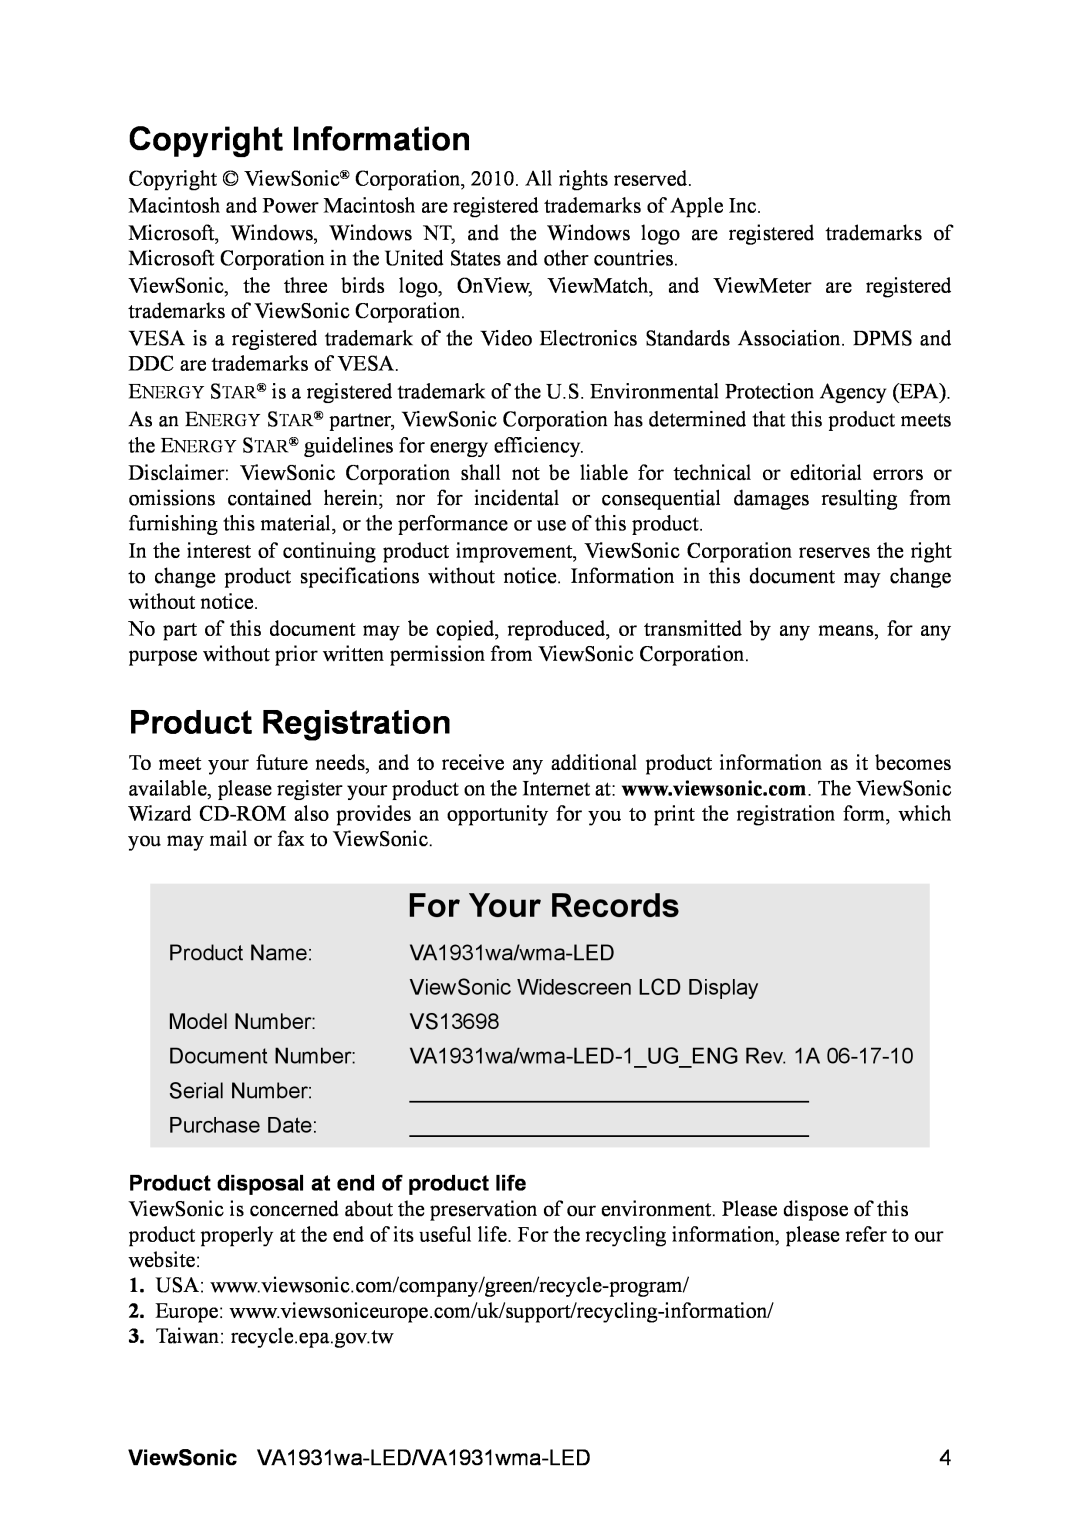 ViewSonic VS13698 Copyright Information, Product Registration, For Your Records, Product disposal at end of product life 